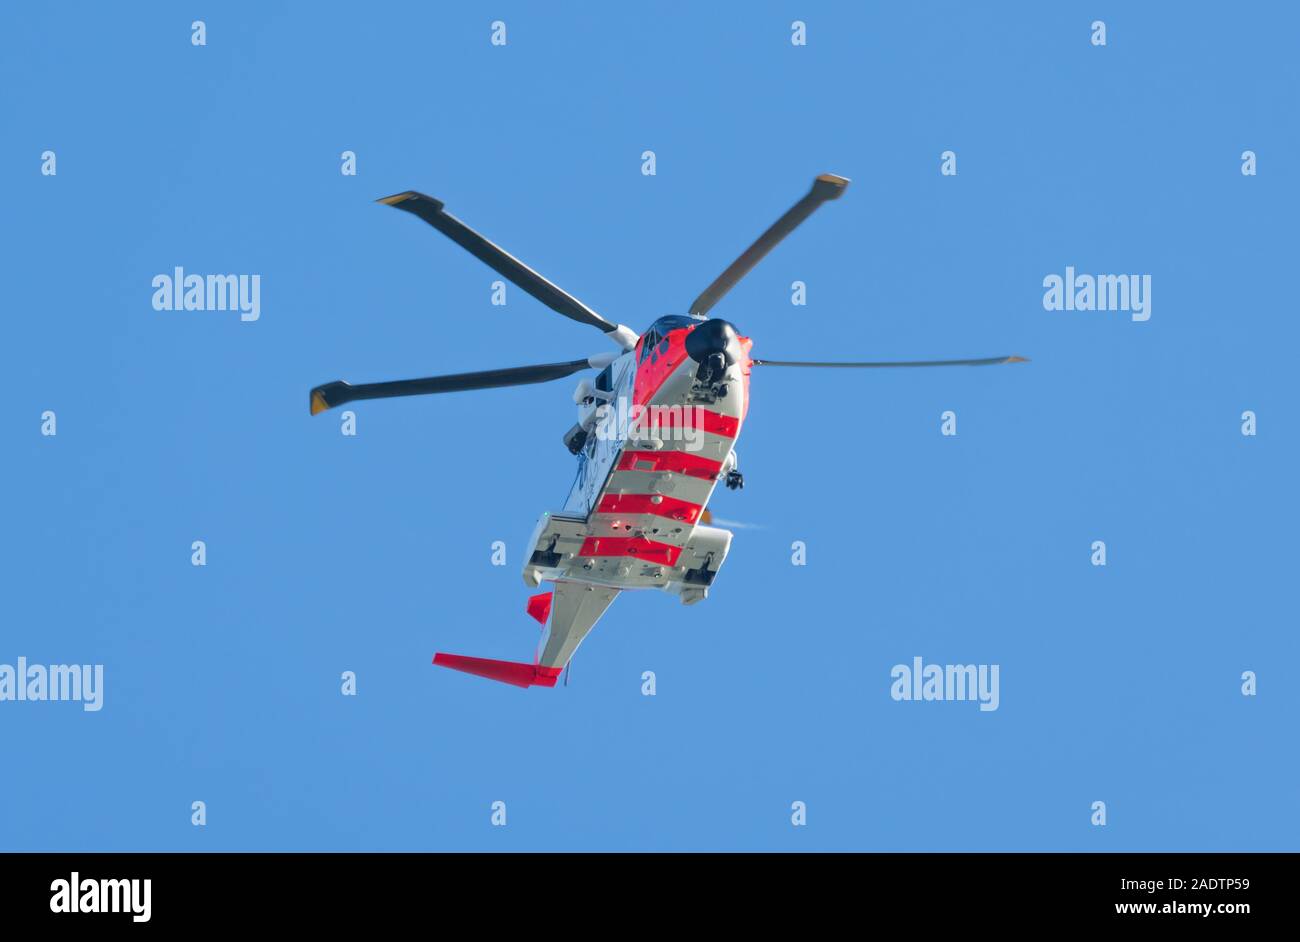 Underside of a AgustaWestland AW101 medium lift rescue helicopter (Norwegian SAR rescue helicopter) with retractable landing gear. Stock Photo